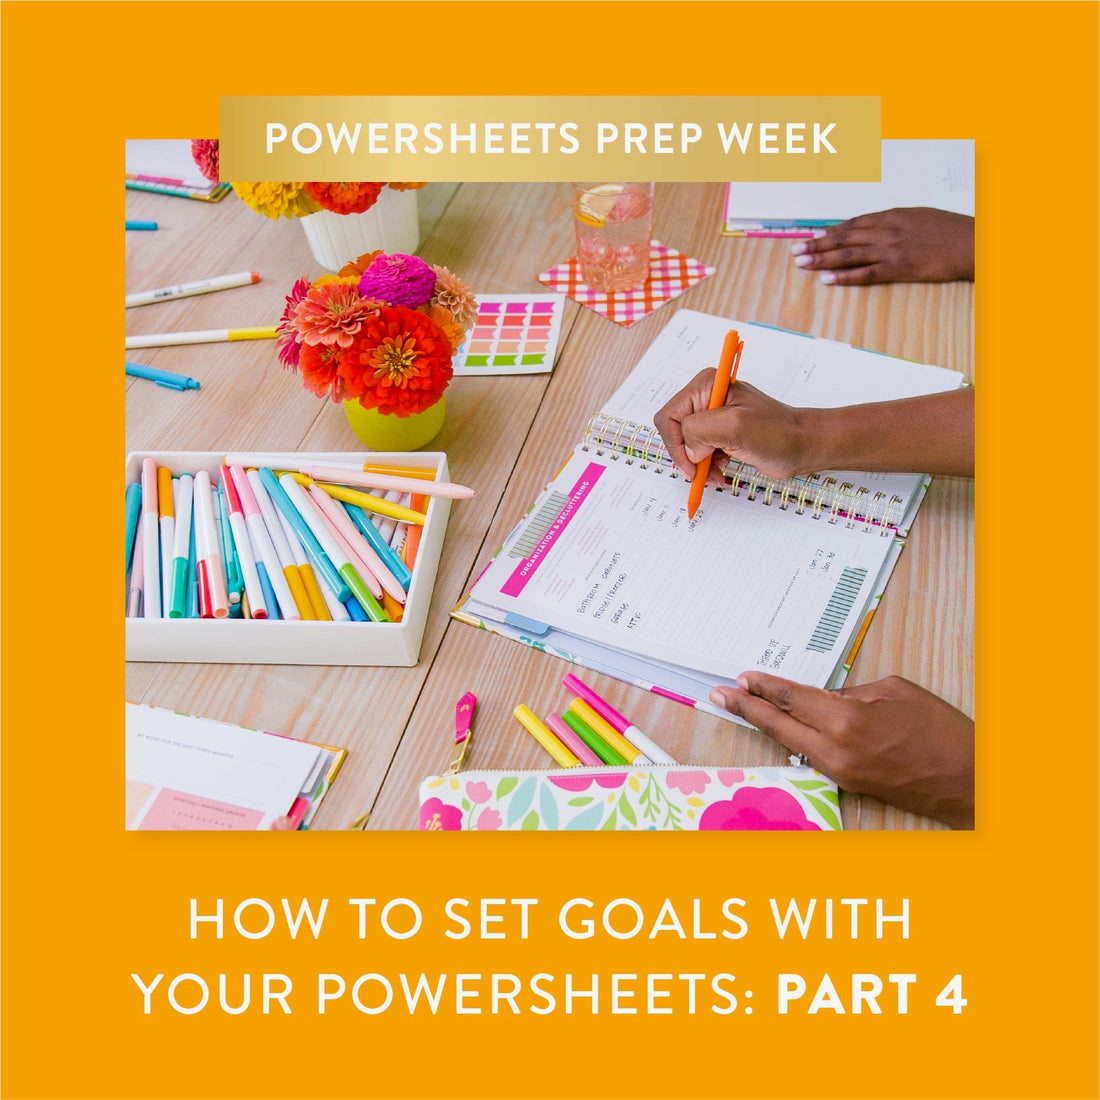 How to Set Goals With Your PowerSheets: Part 4